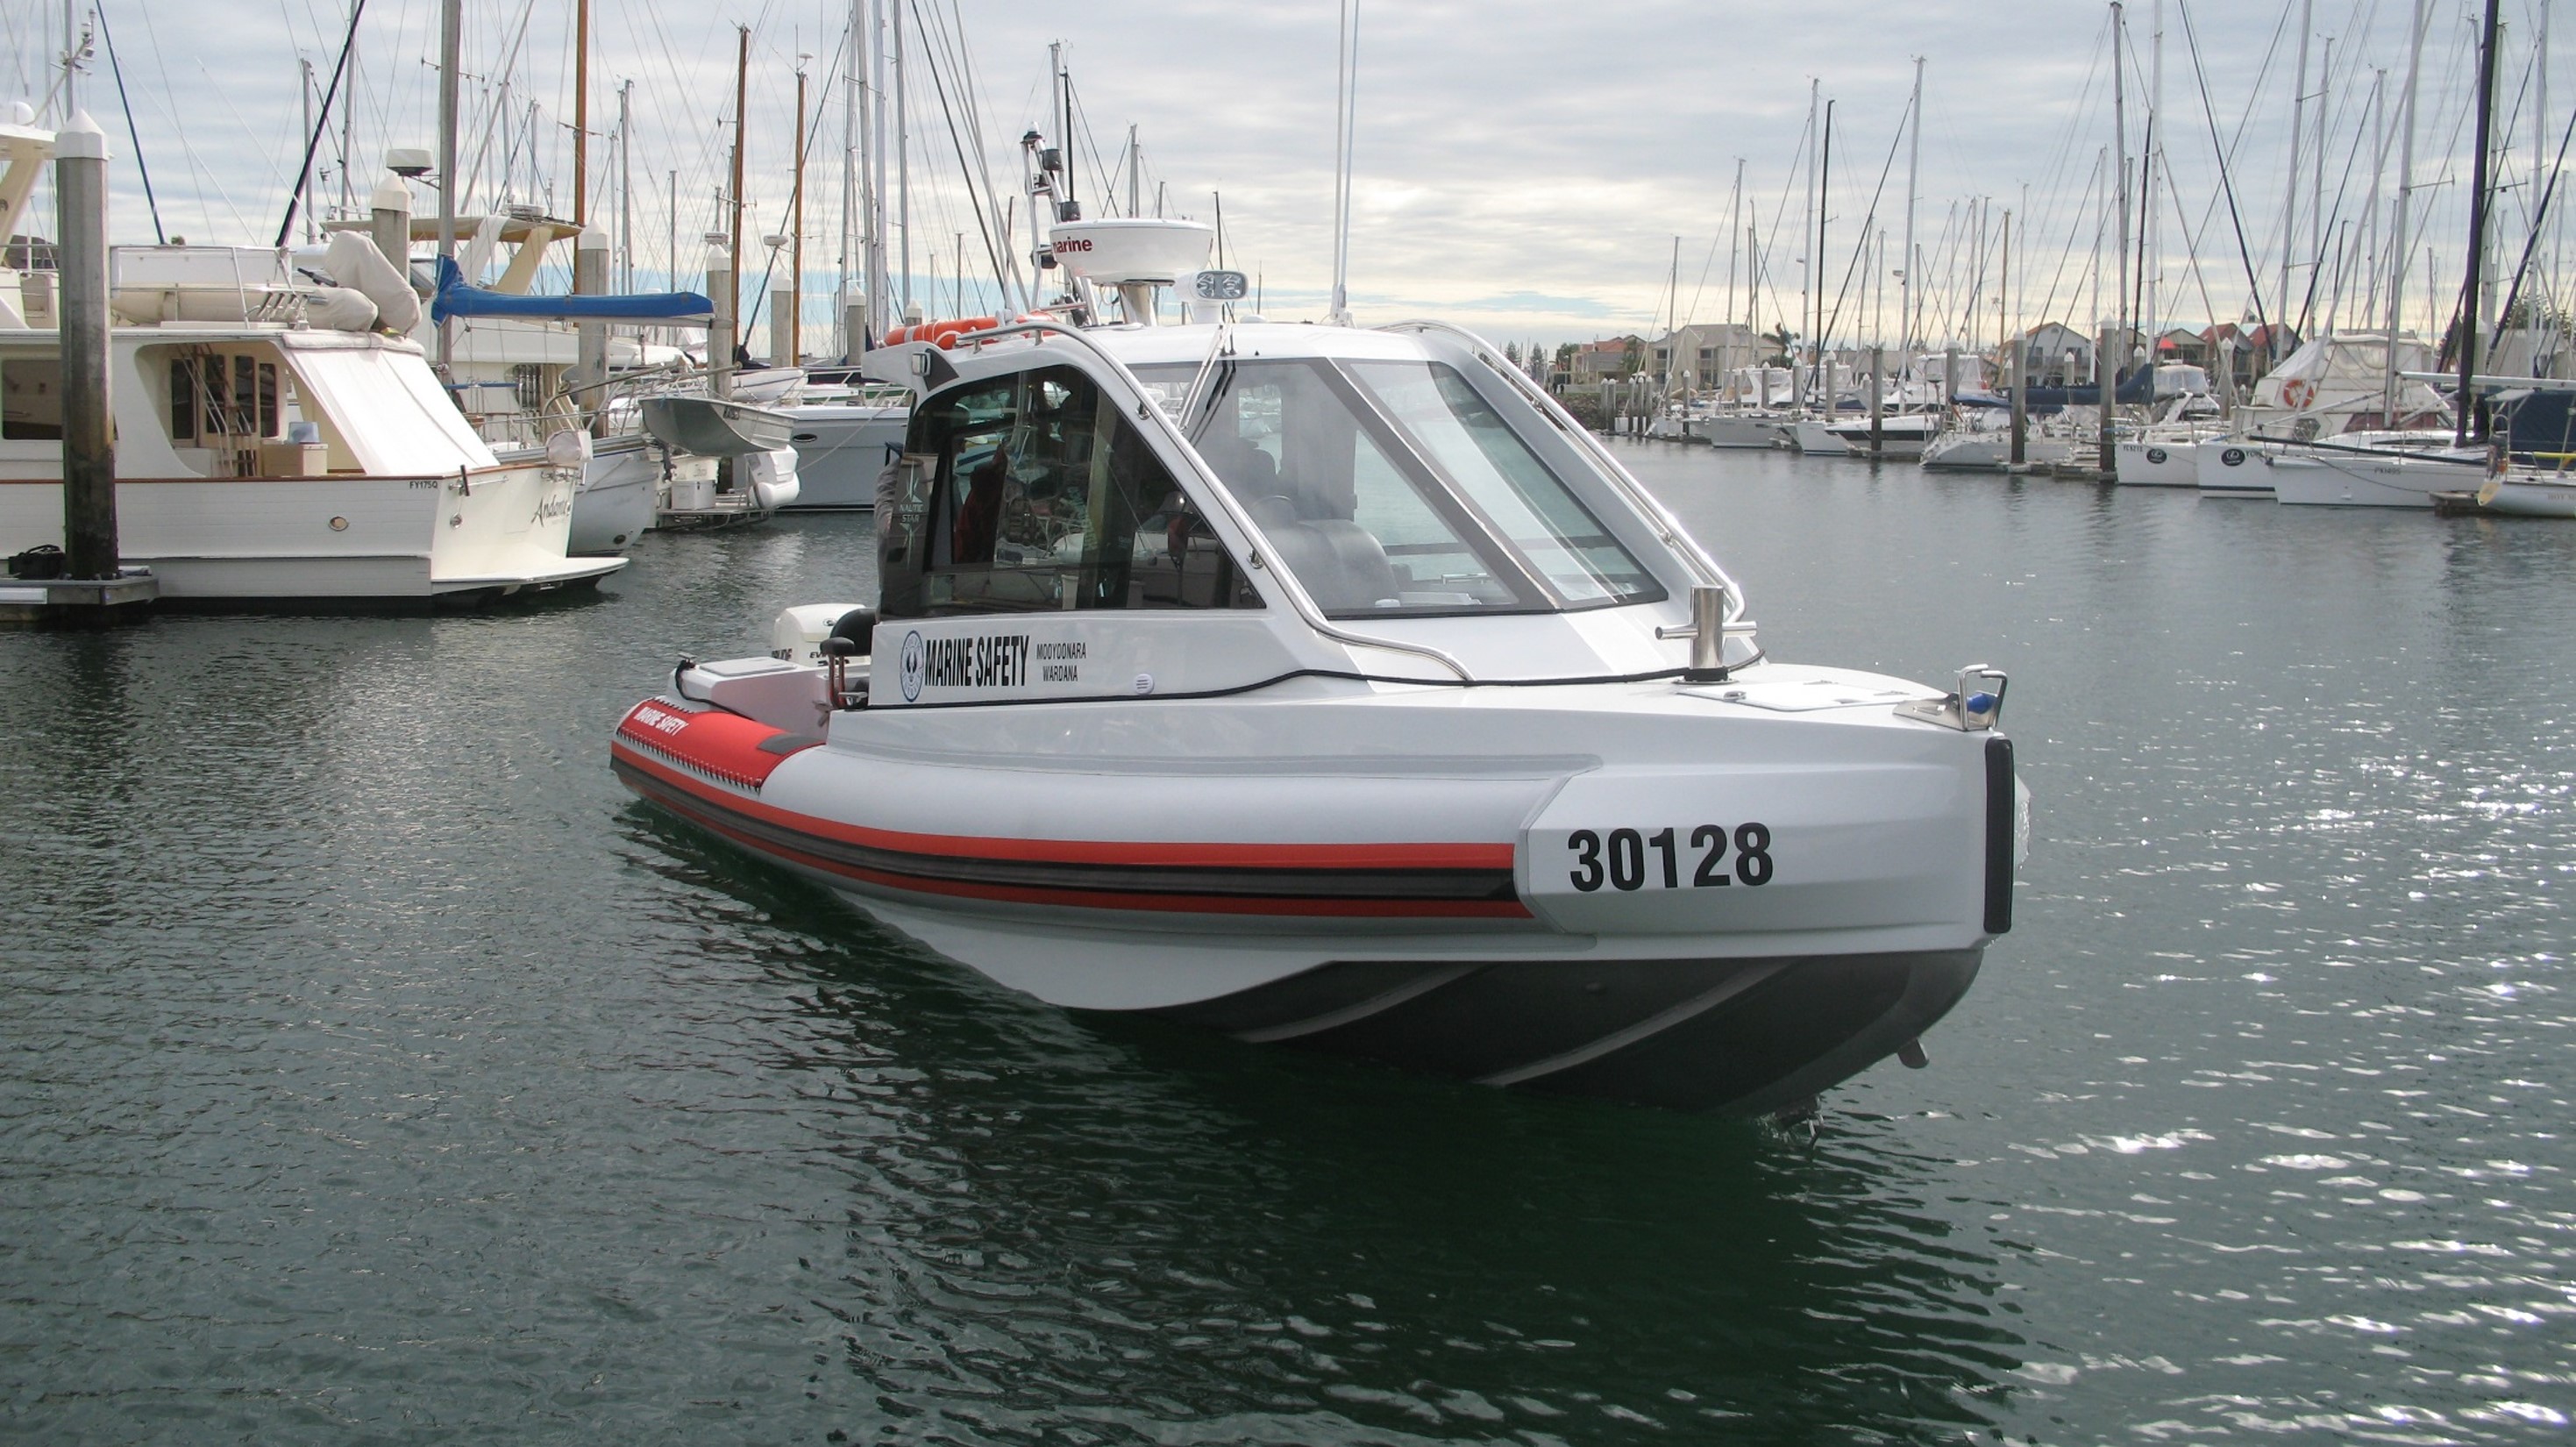 Marine Safety boat on water with boats moored behind it